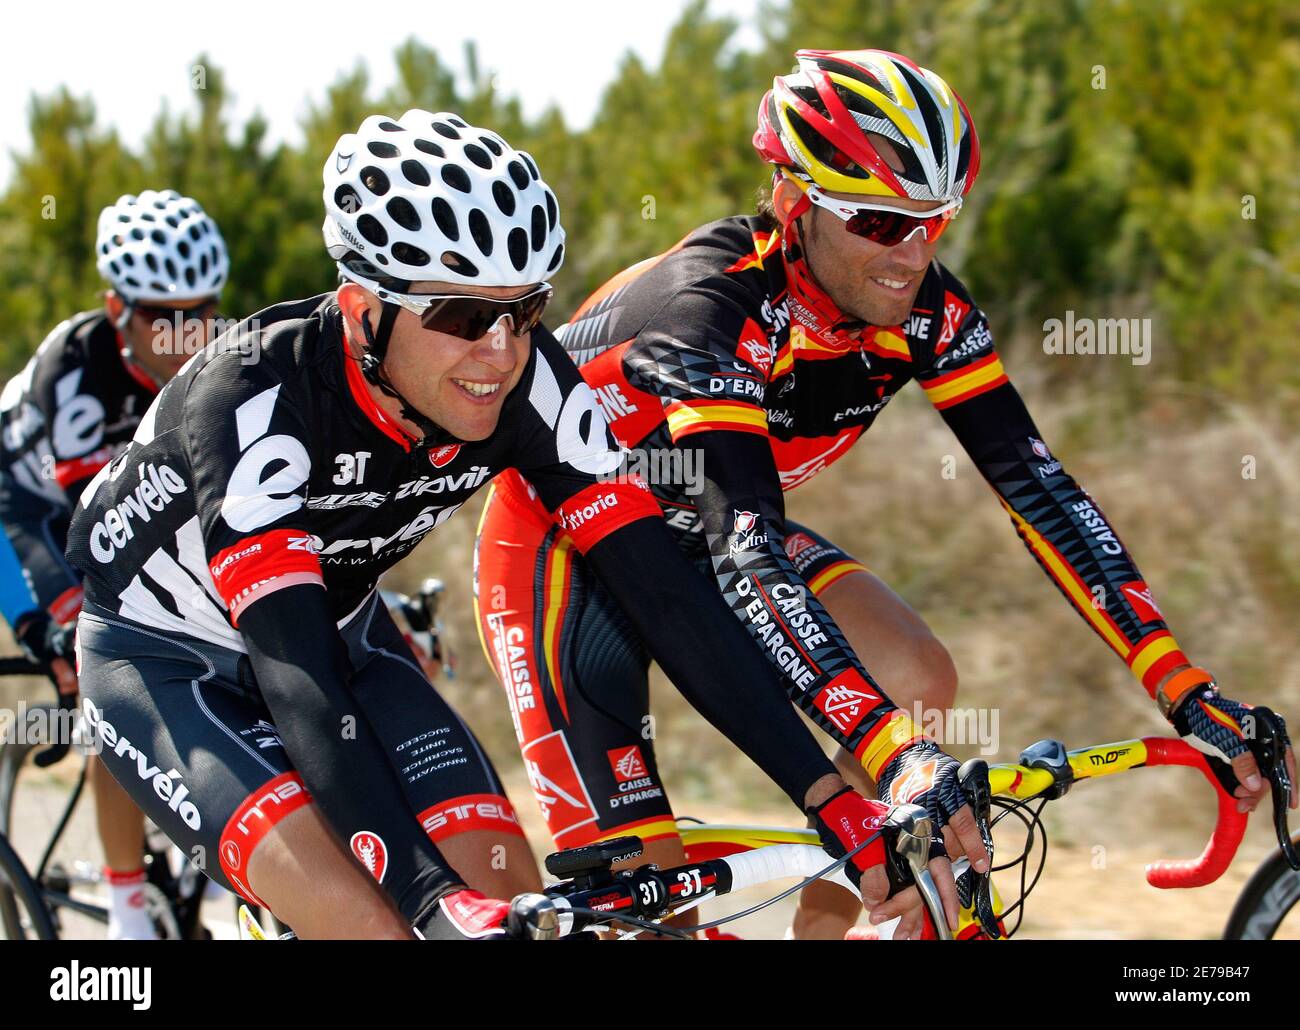 Caisse D'espargne rider Alejandro Valverde (R) and Cervelo Test Team rider  Carlos Sastre cycle during the third stage of the Vuelta de Castilla y Leon  cycling race between Sahagun and Estacion Invernal